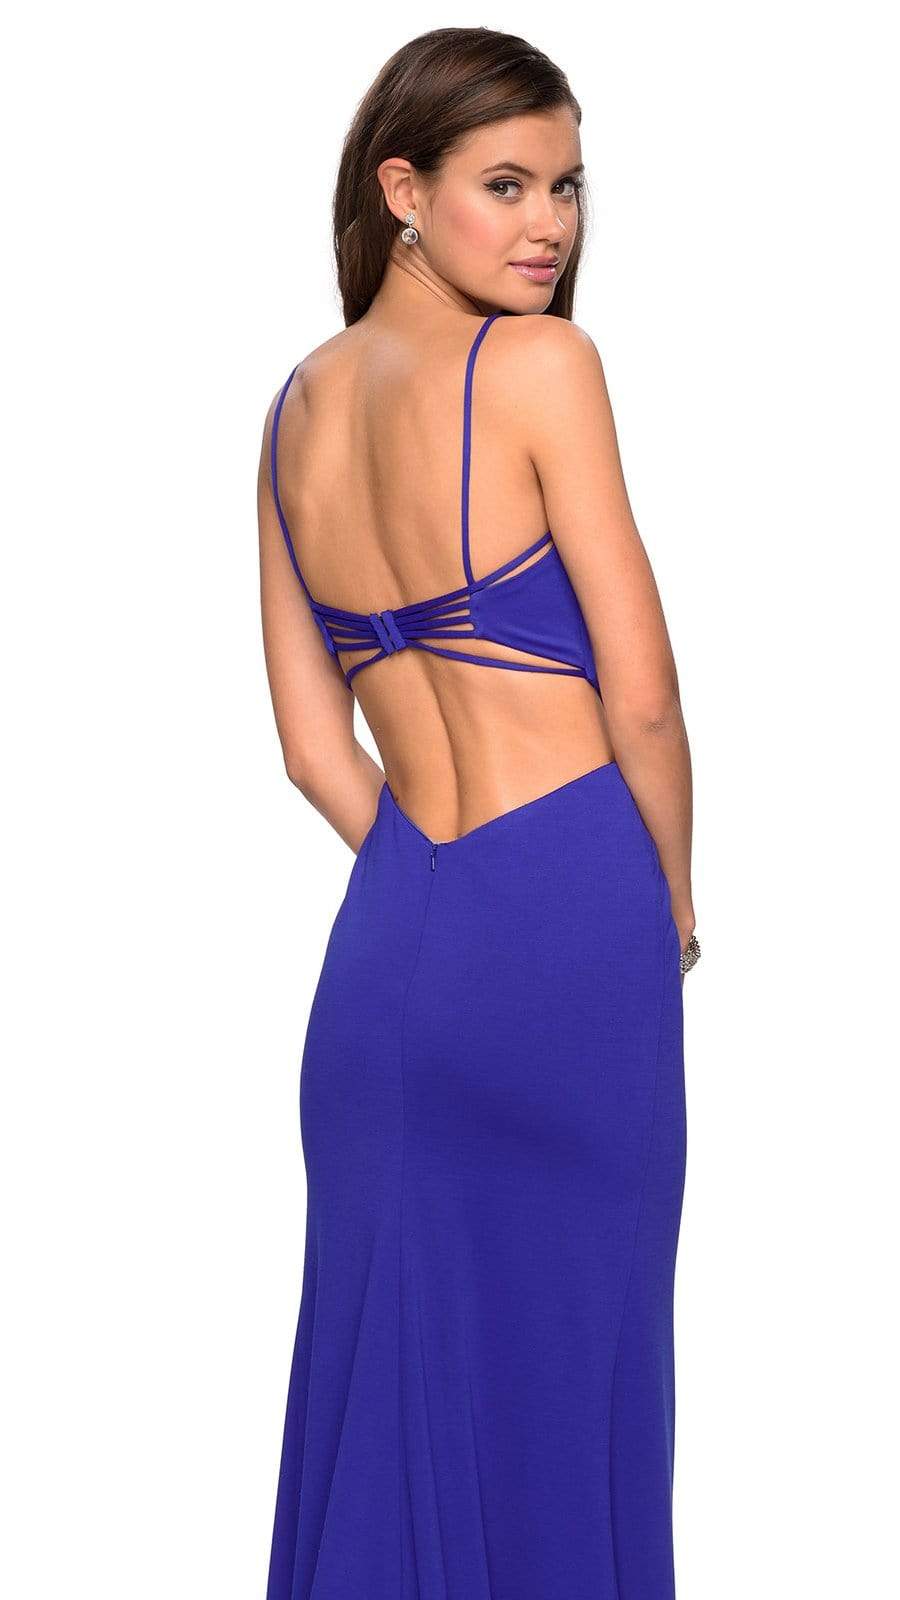 La Femme - V-Neck Strappy Open Back Evening Dress 27516SC -  1 pc Royal Blue in Size 00 and 1 pc Plum in Size 10 Available CCSALE